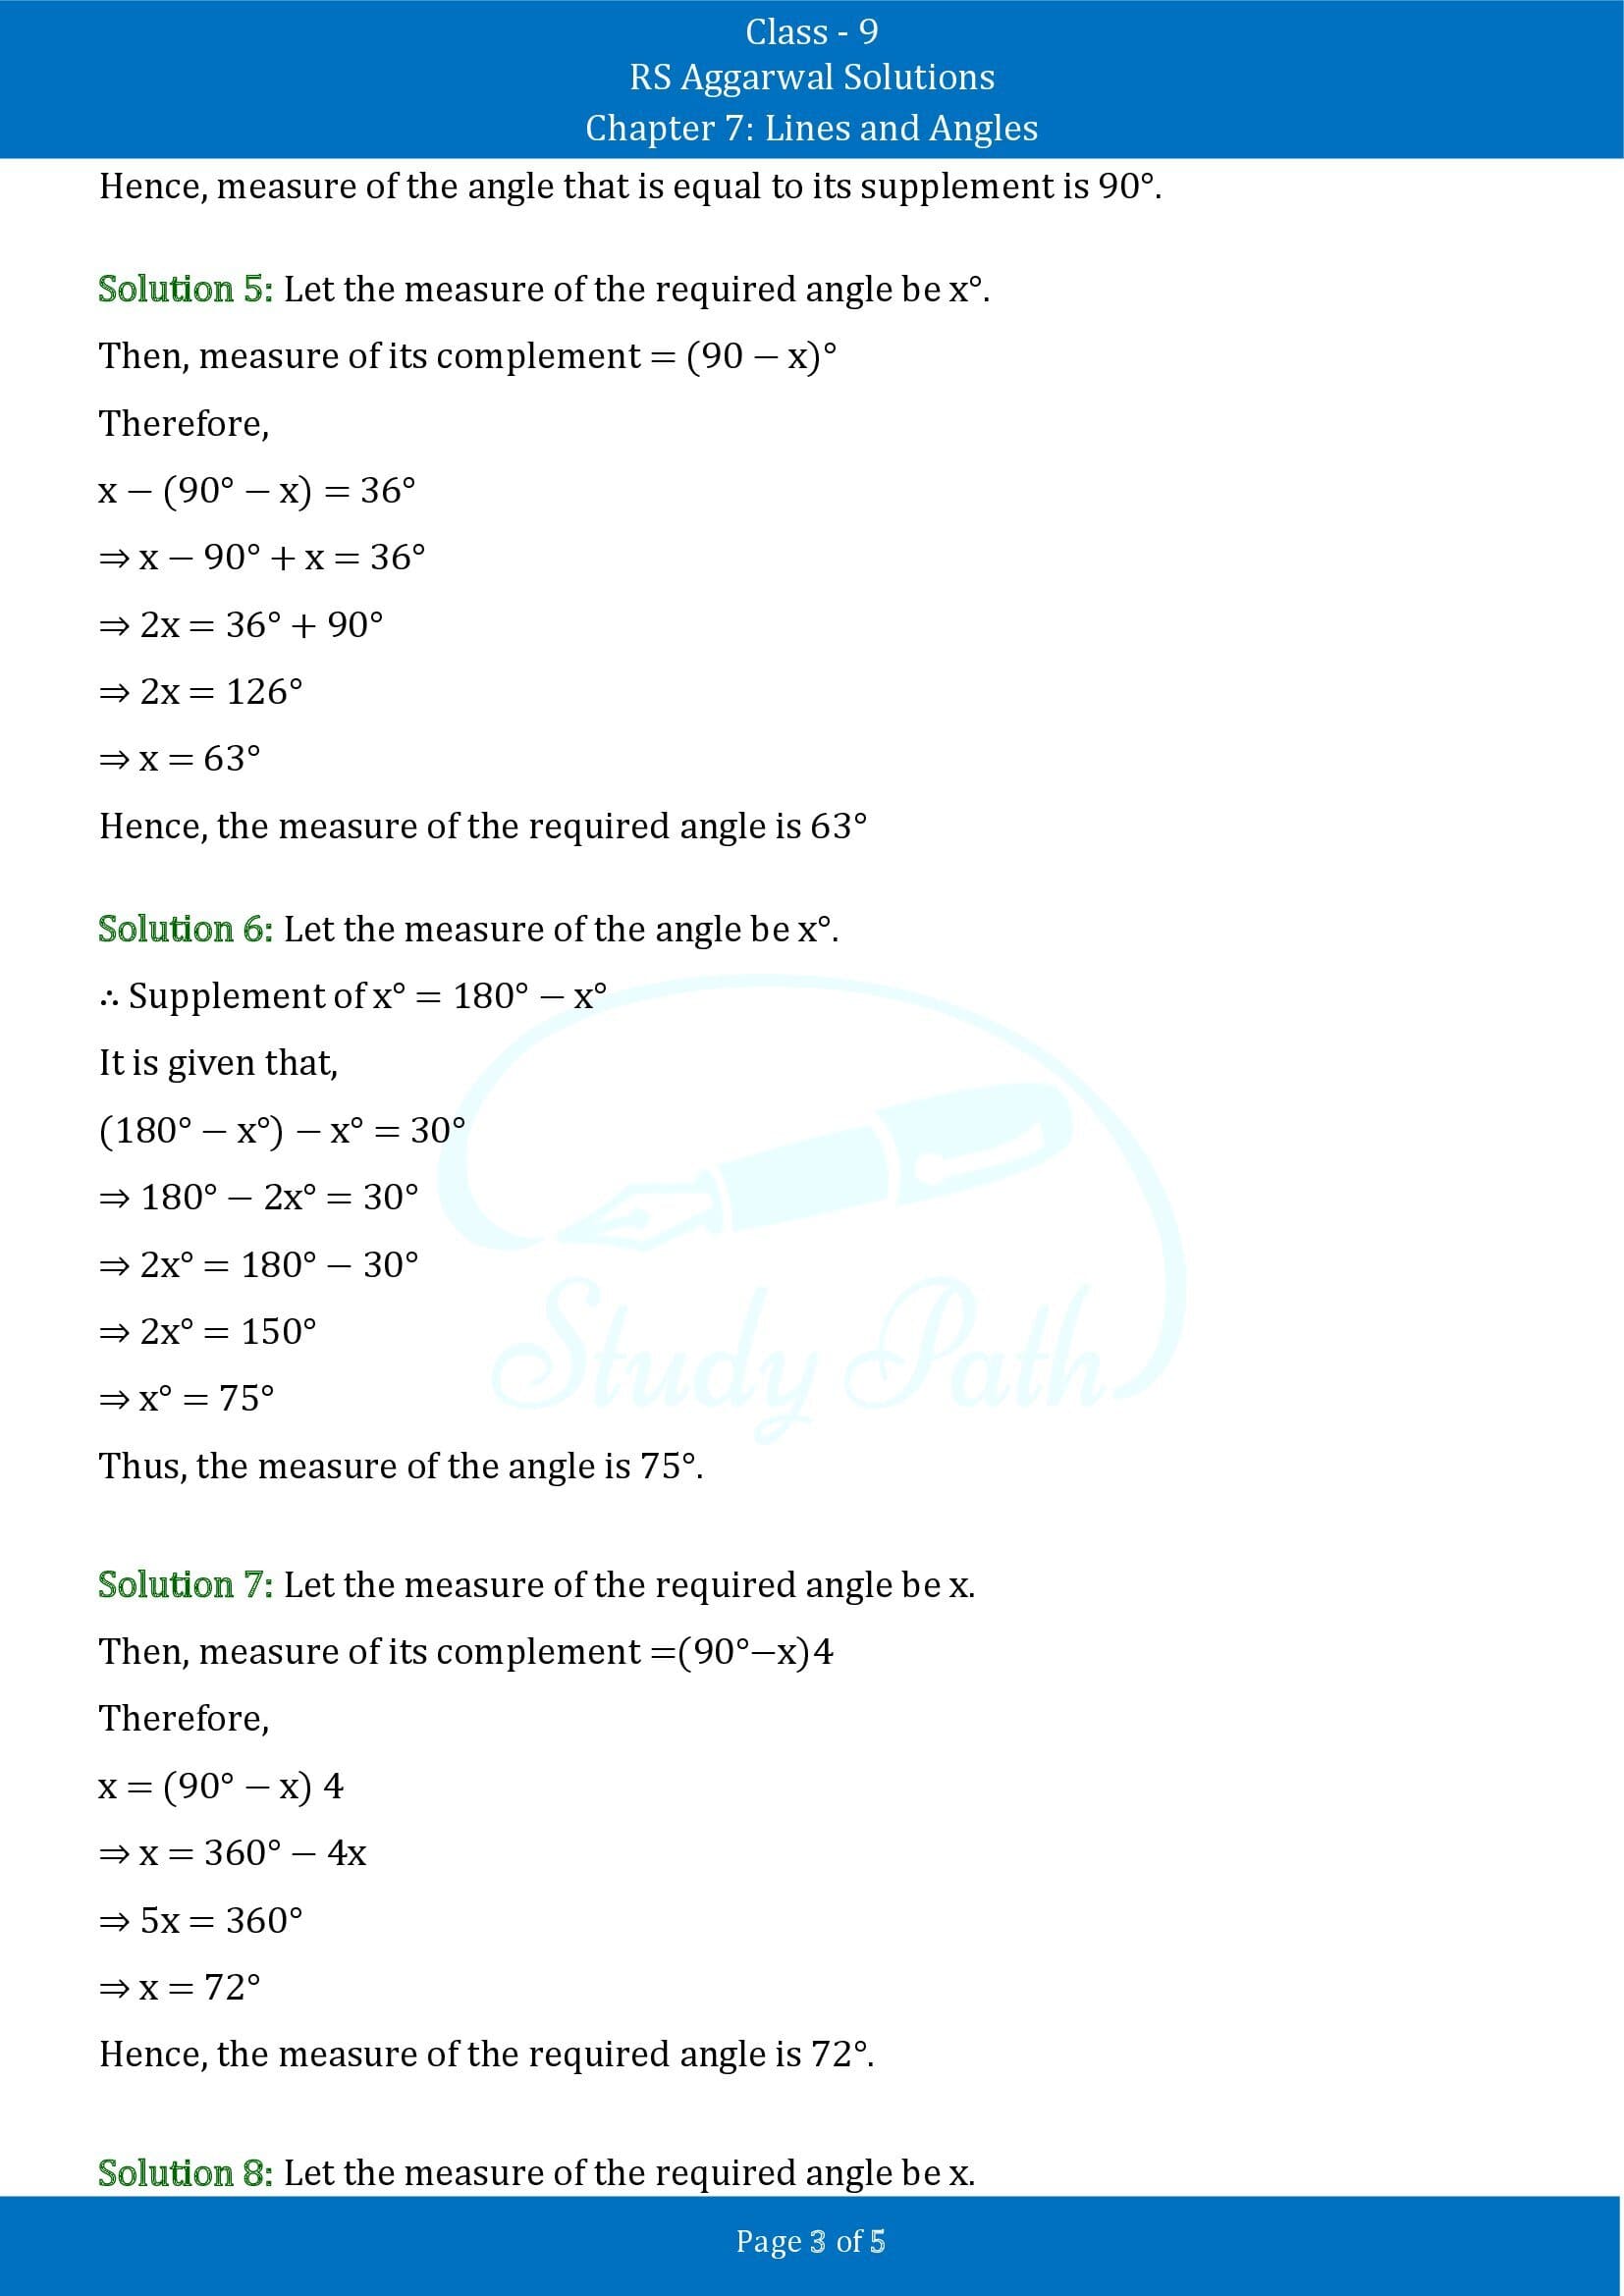 RS Aggarwal Solutions Class 9 Chapter 7 Lines and Angles Exercise 7A 00003